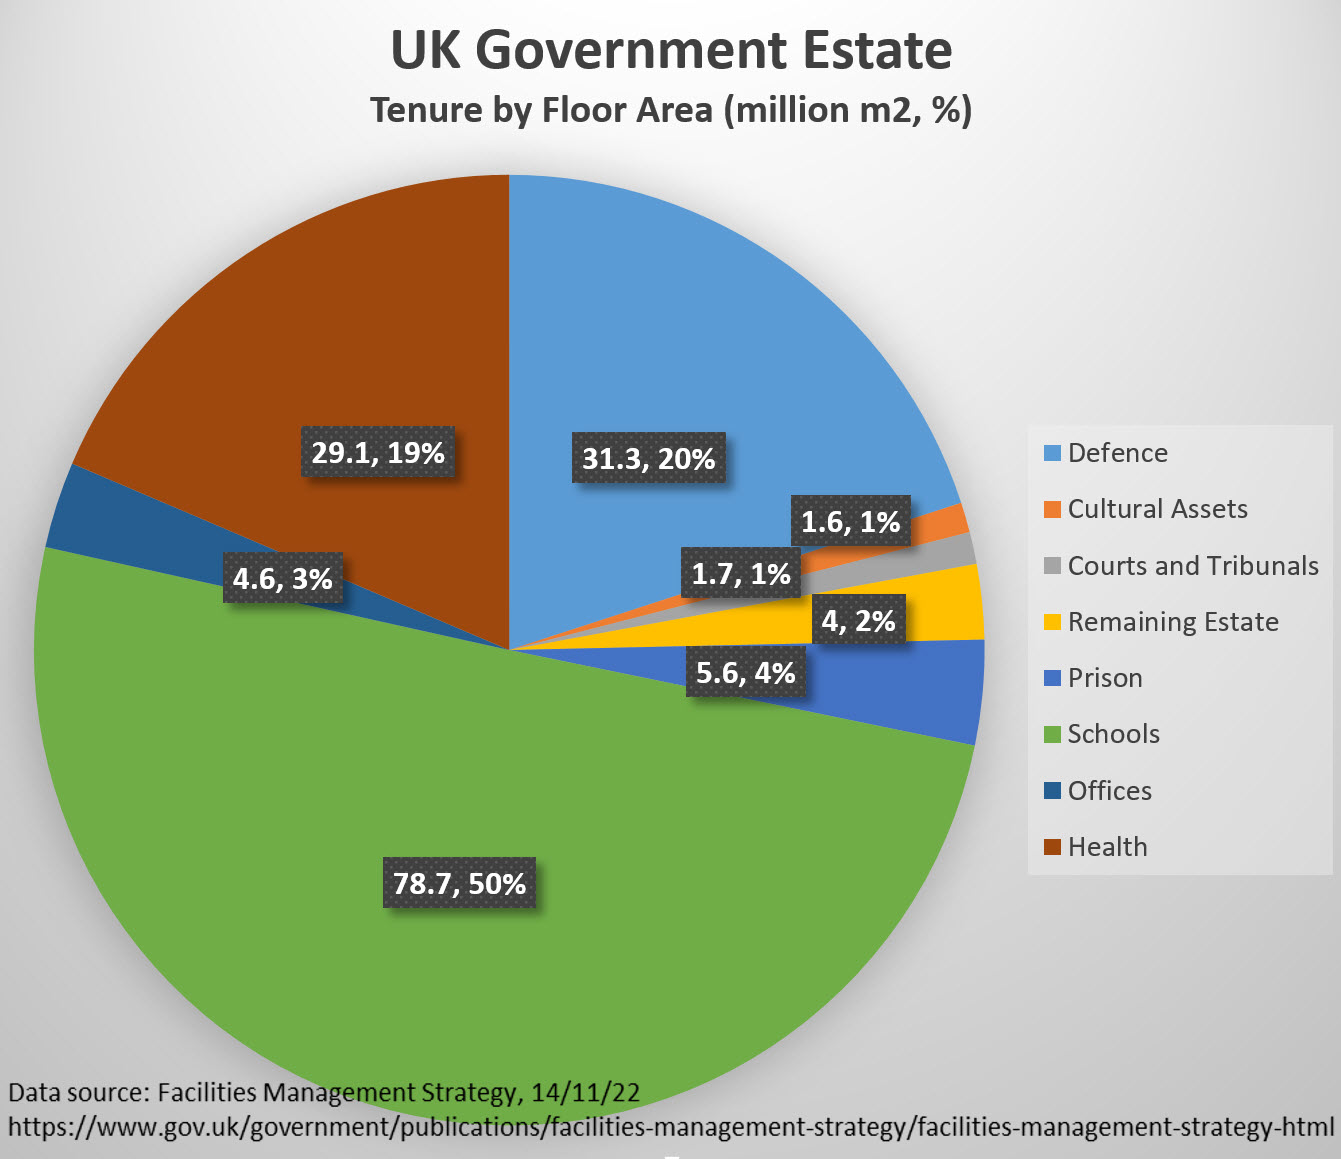 Pie chart showing the tenure by floor area of the UK Government's estate.